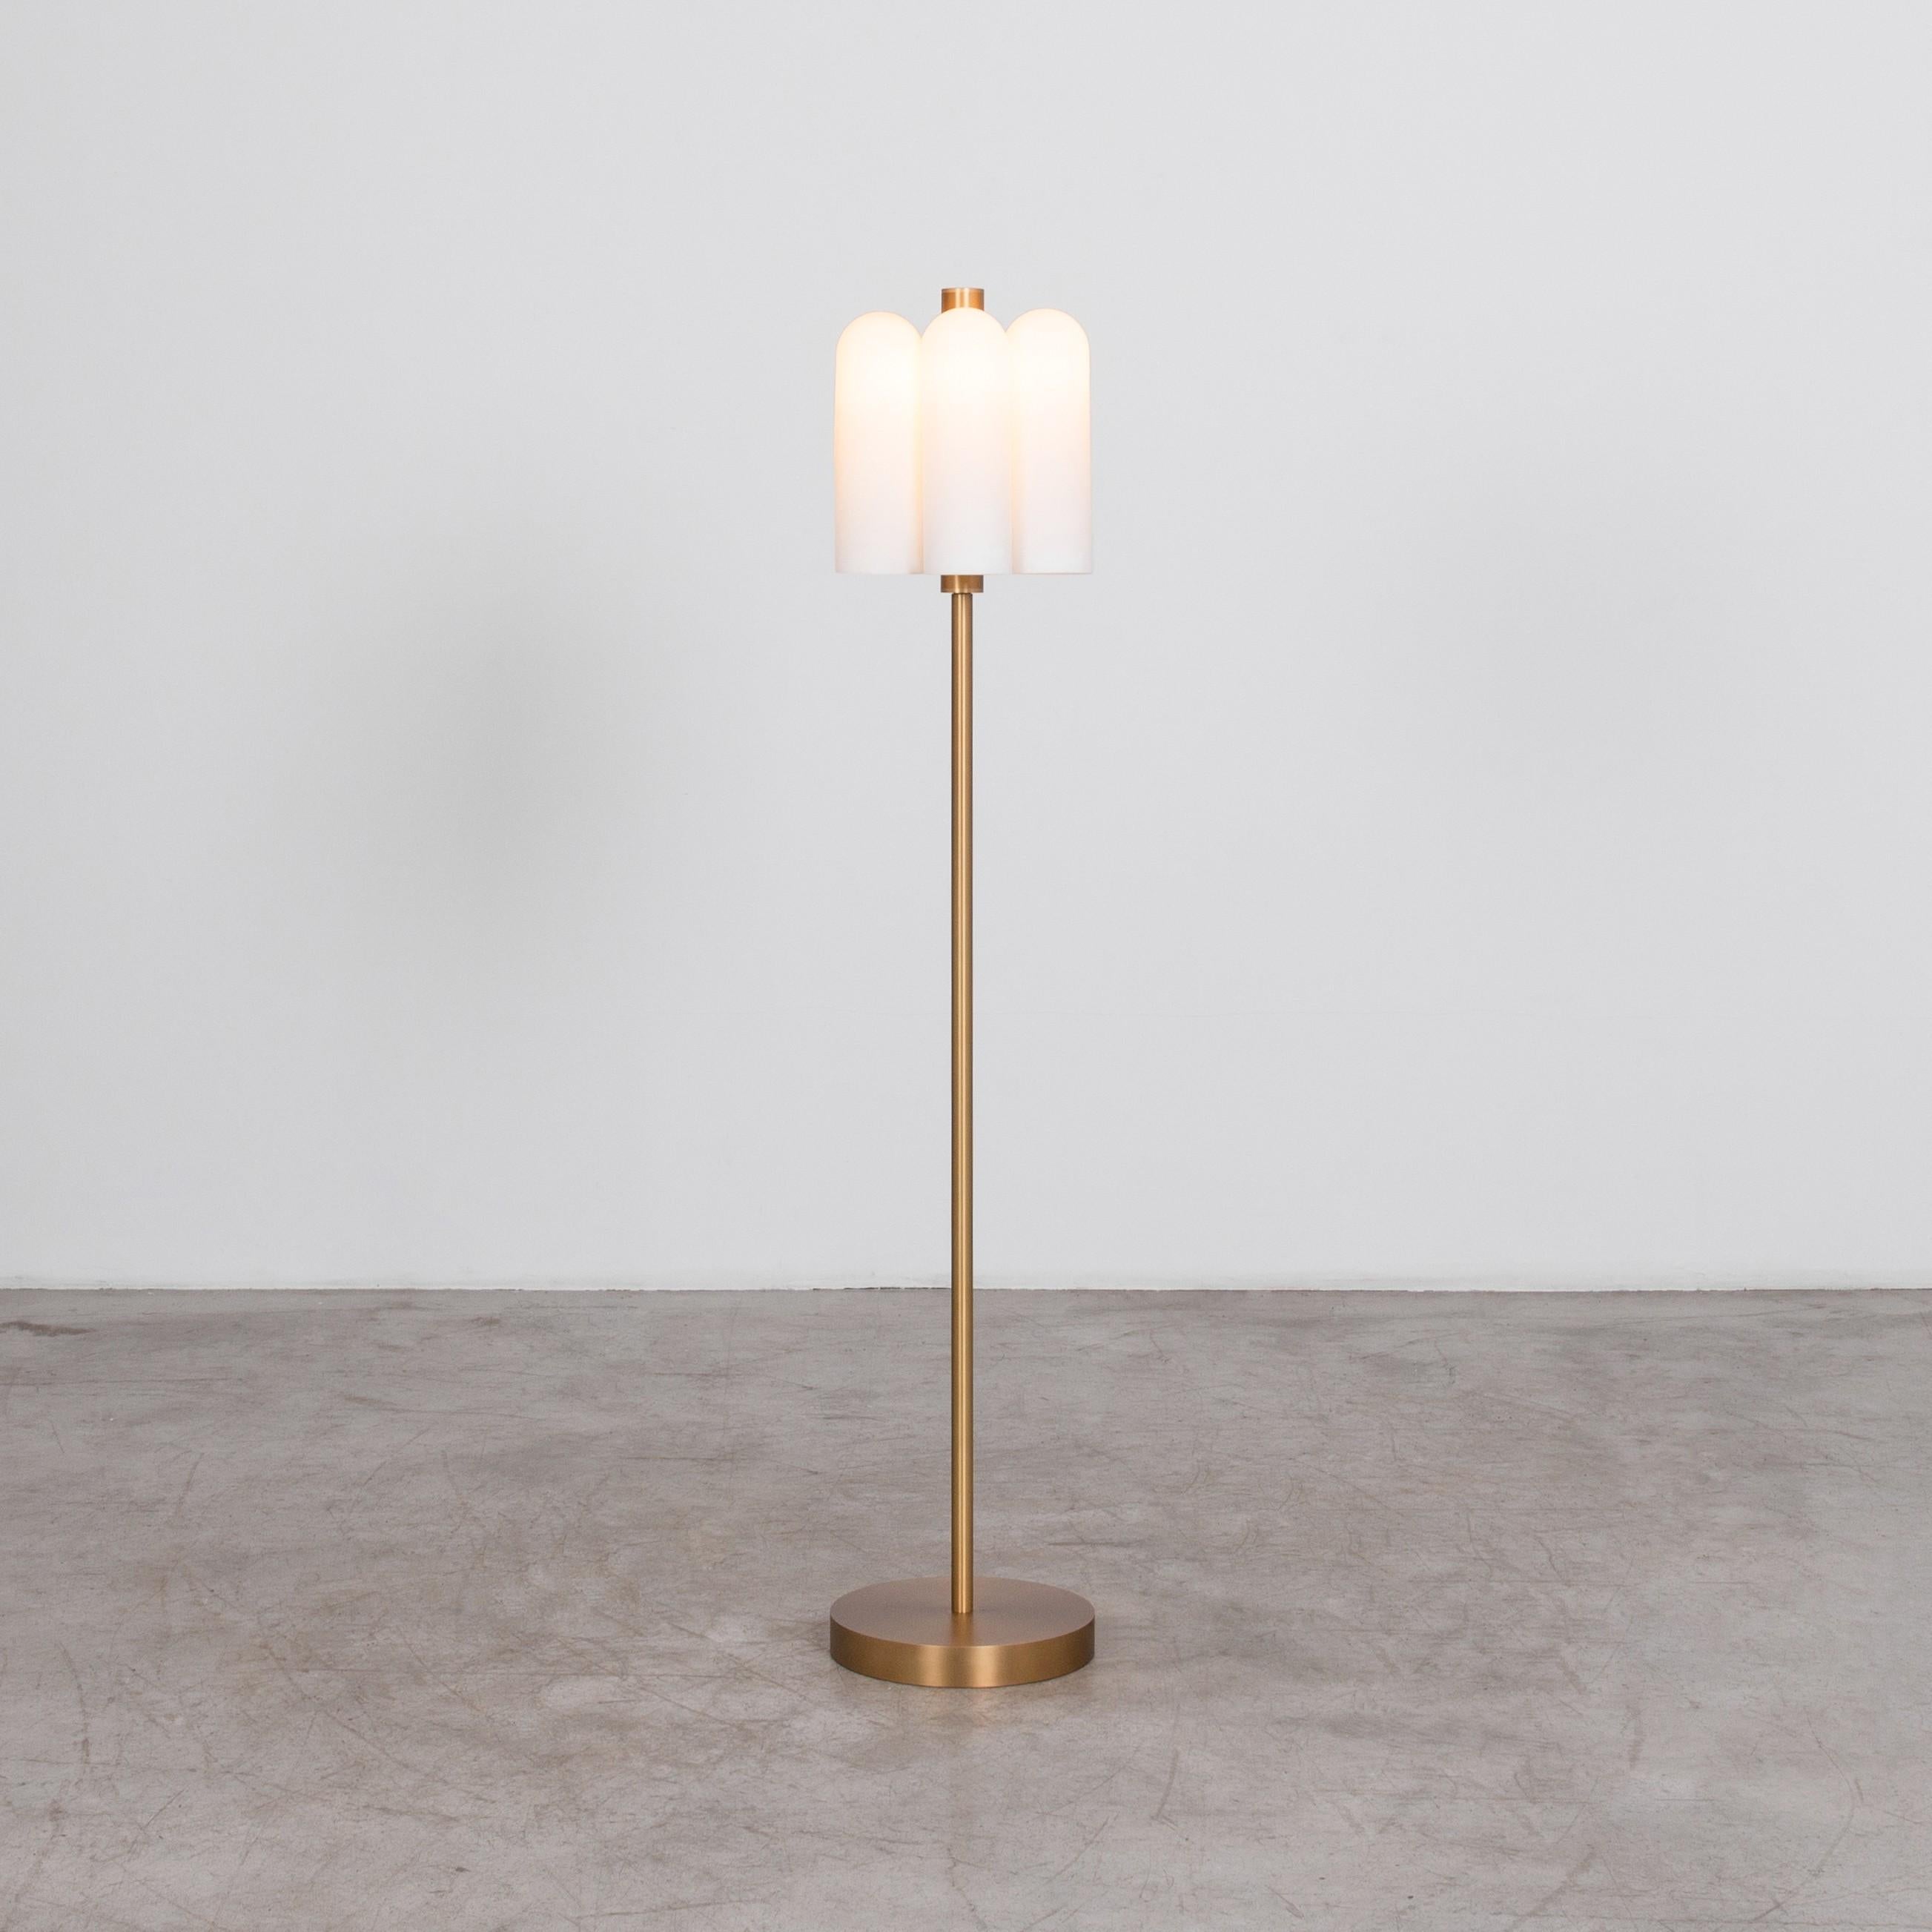 Odyssey 6 Brass floor lamp by Schwung
Dimensions: W 31.5 x D 31.5 x H 155 cm
Materials: Brass, frosted glass

Finishes available: Black gunmetal, polished nickel, brass
Other sizes available

Schwung is a German word, and loosely defined, means